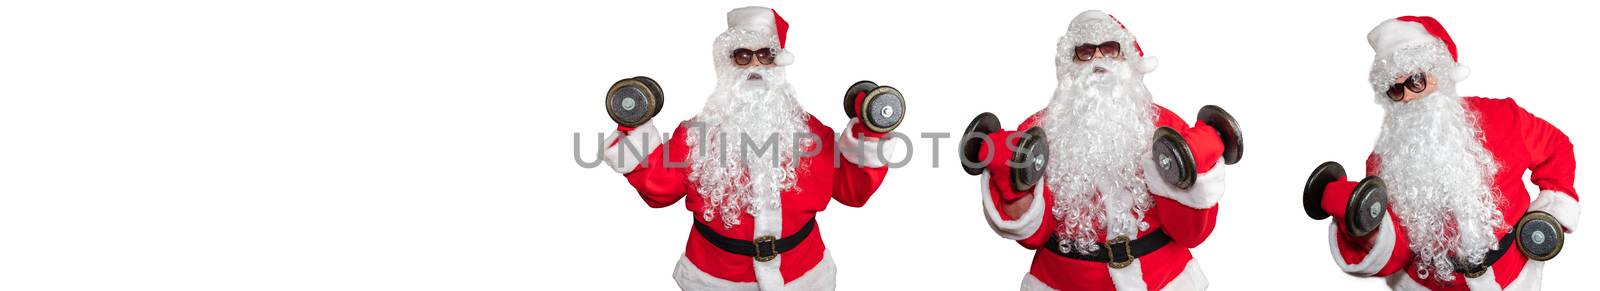 Three Santa Clauses working out, pushing and lifting dumbbells, doing bicep curls. Isolated on white background. Sport, fitness, bodybuilding conept. Banner size, copy space.